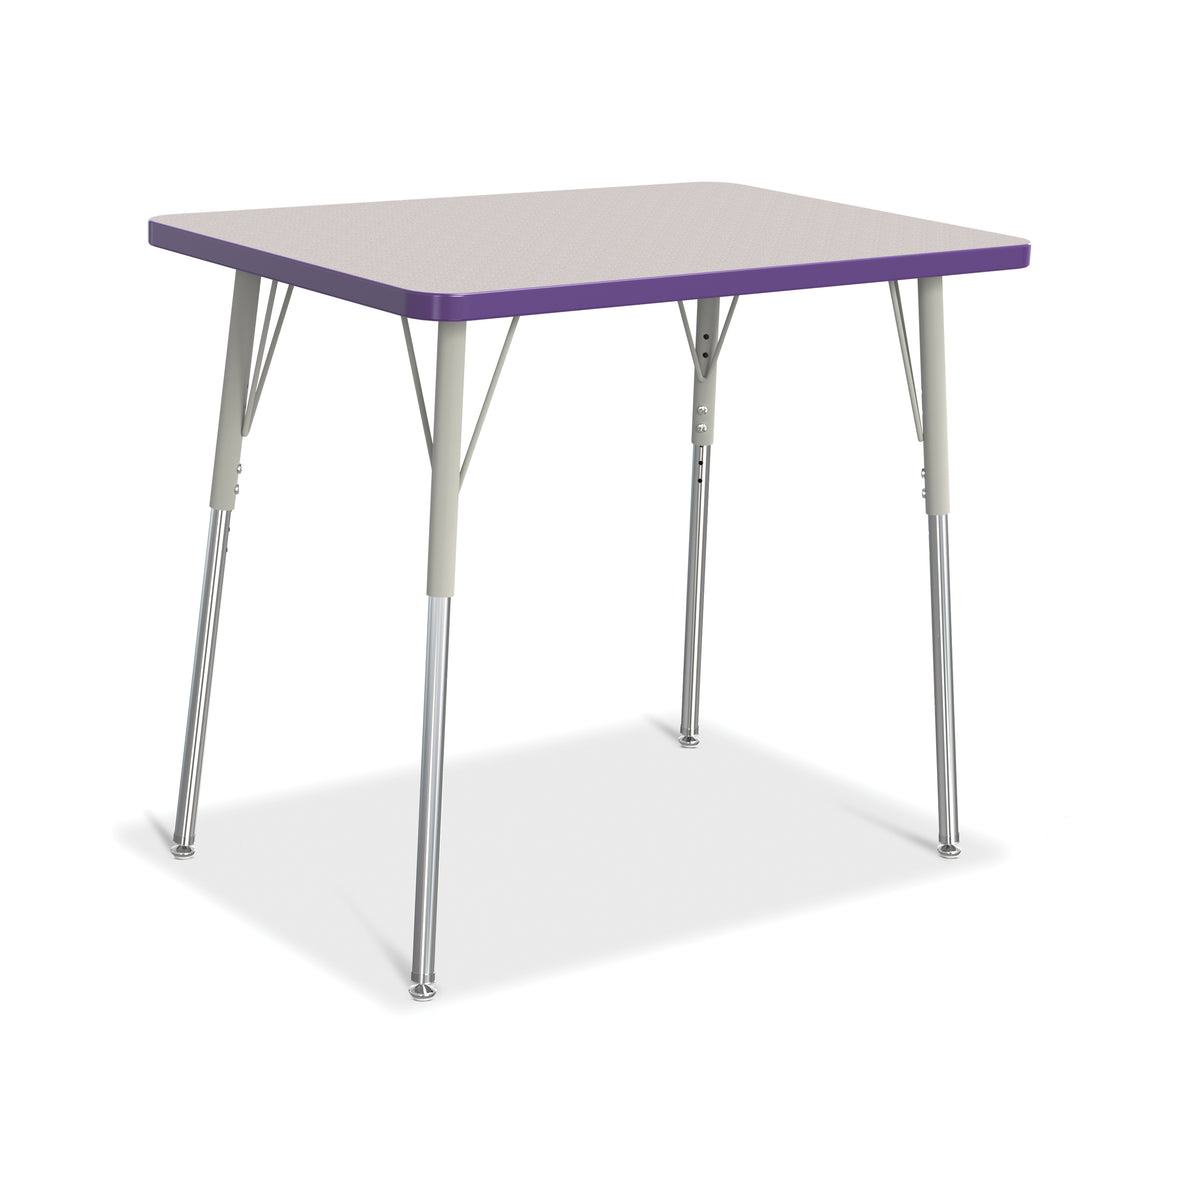 6478JCA004, Berries Rectangle Activity Table - 24" X 36", A-height - Freckled Gray/Purple/Gray